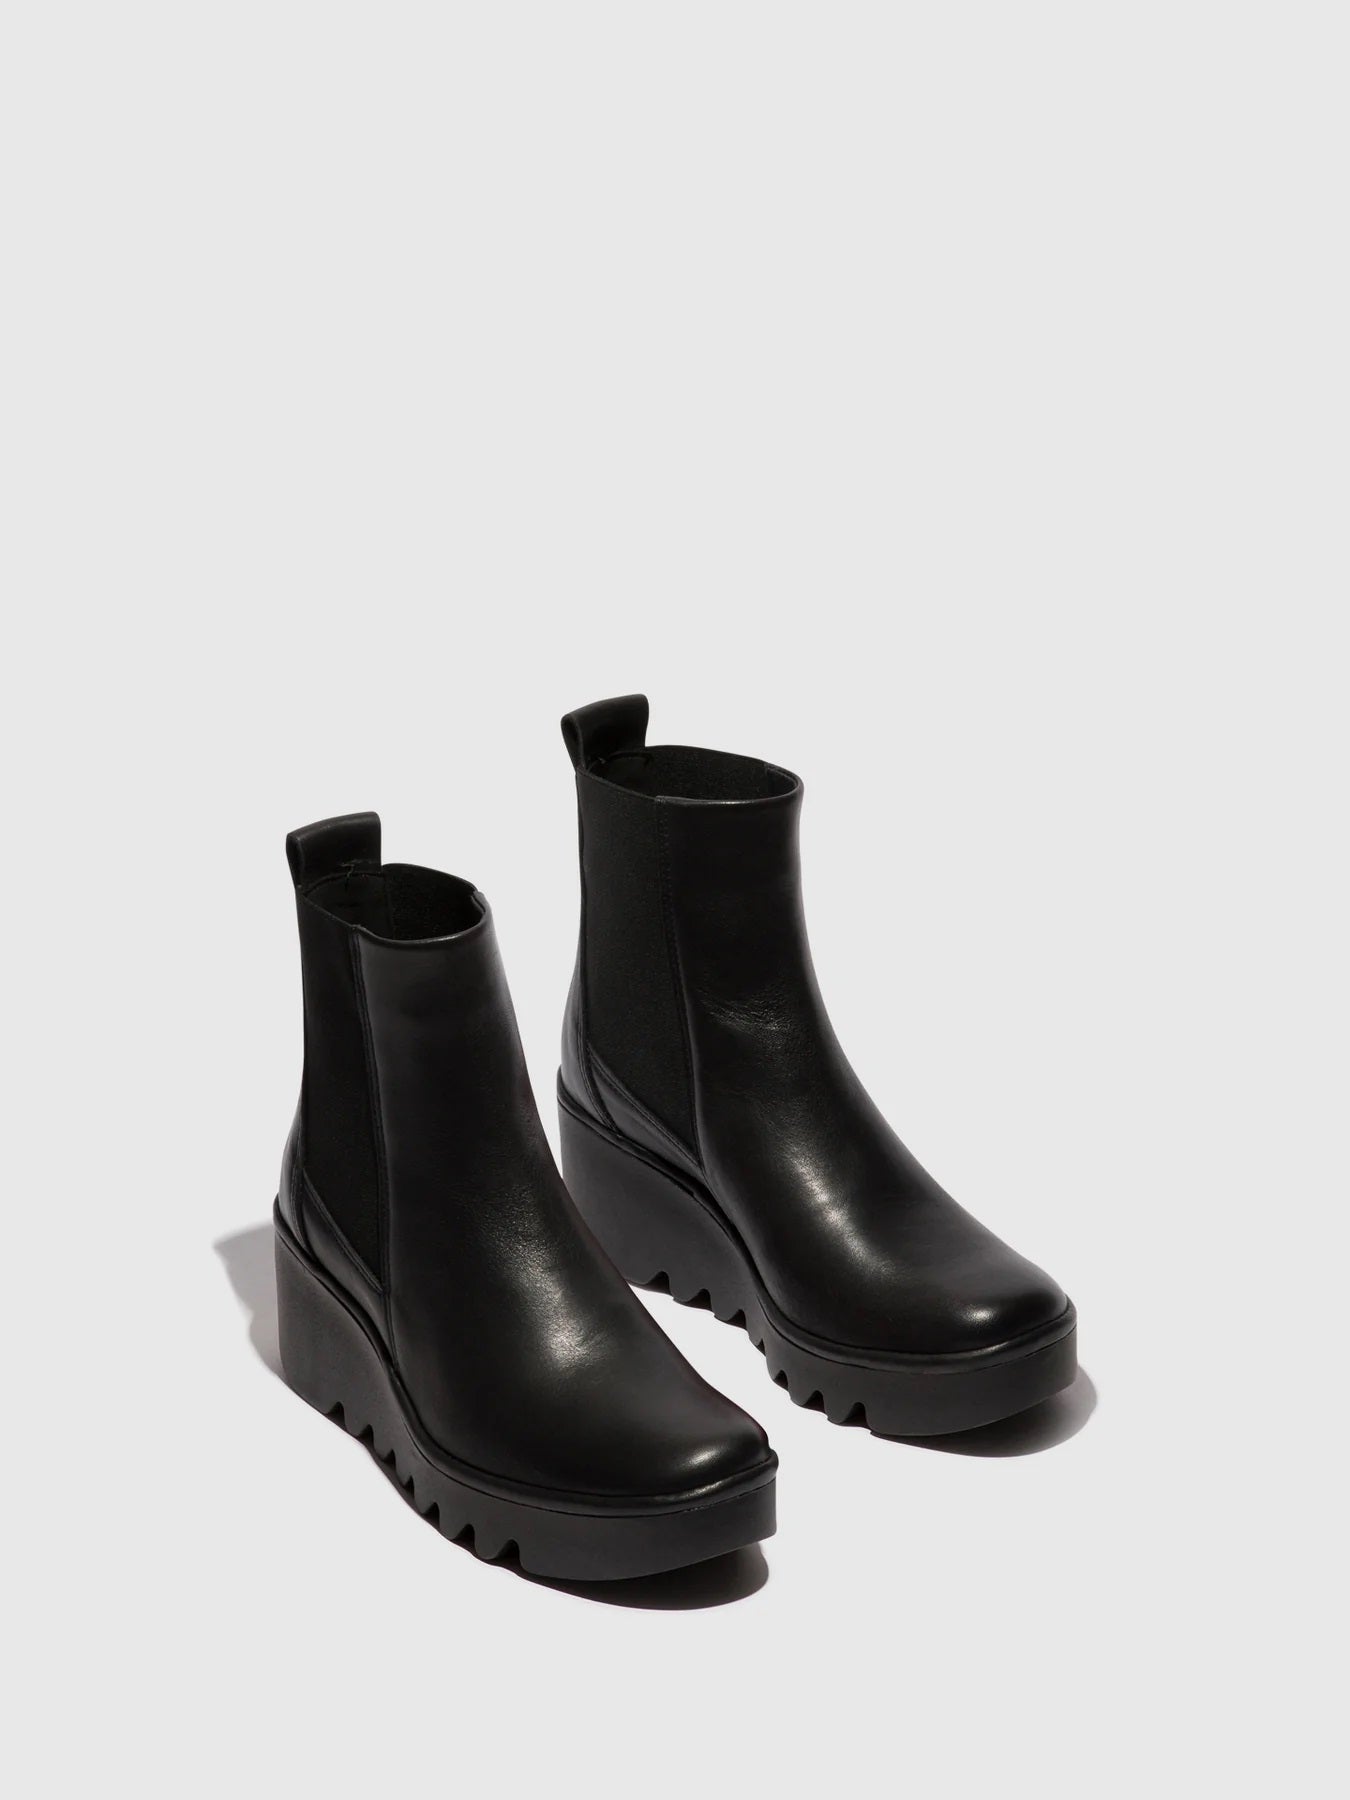 FLY LONDON BAGU BLACK - Women Boots - Collective Shoes 